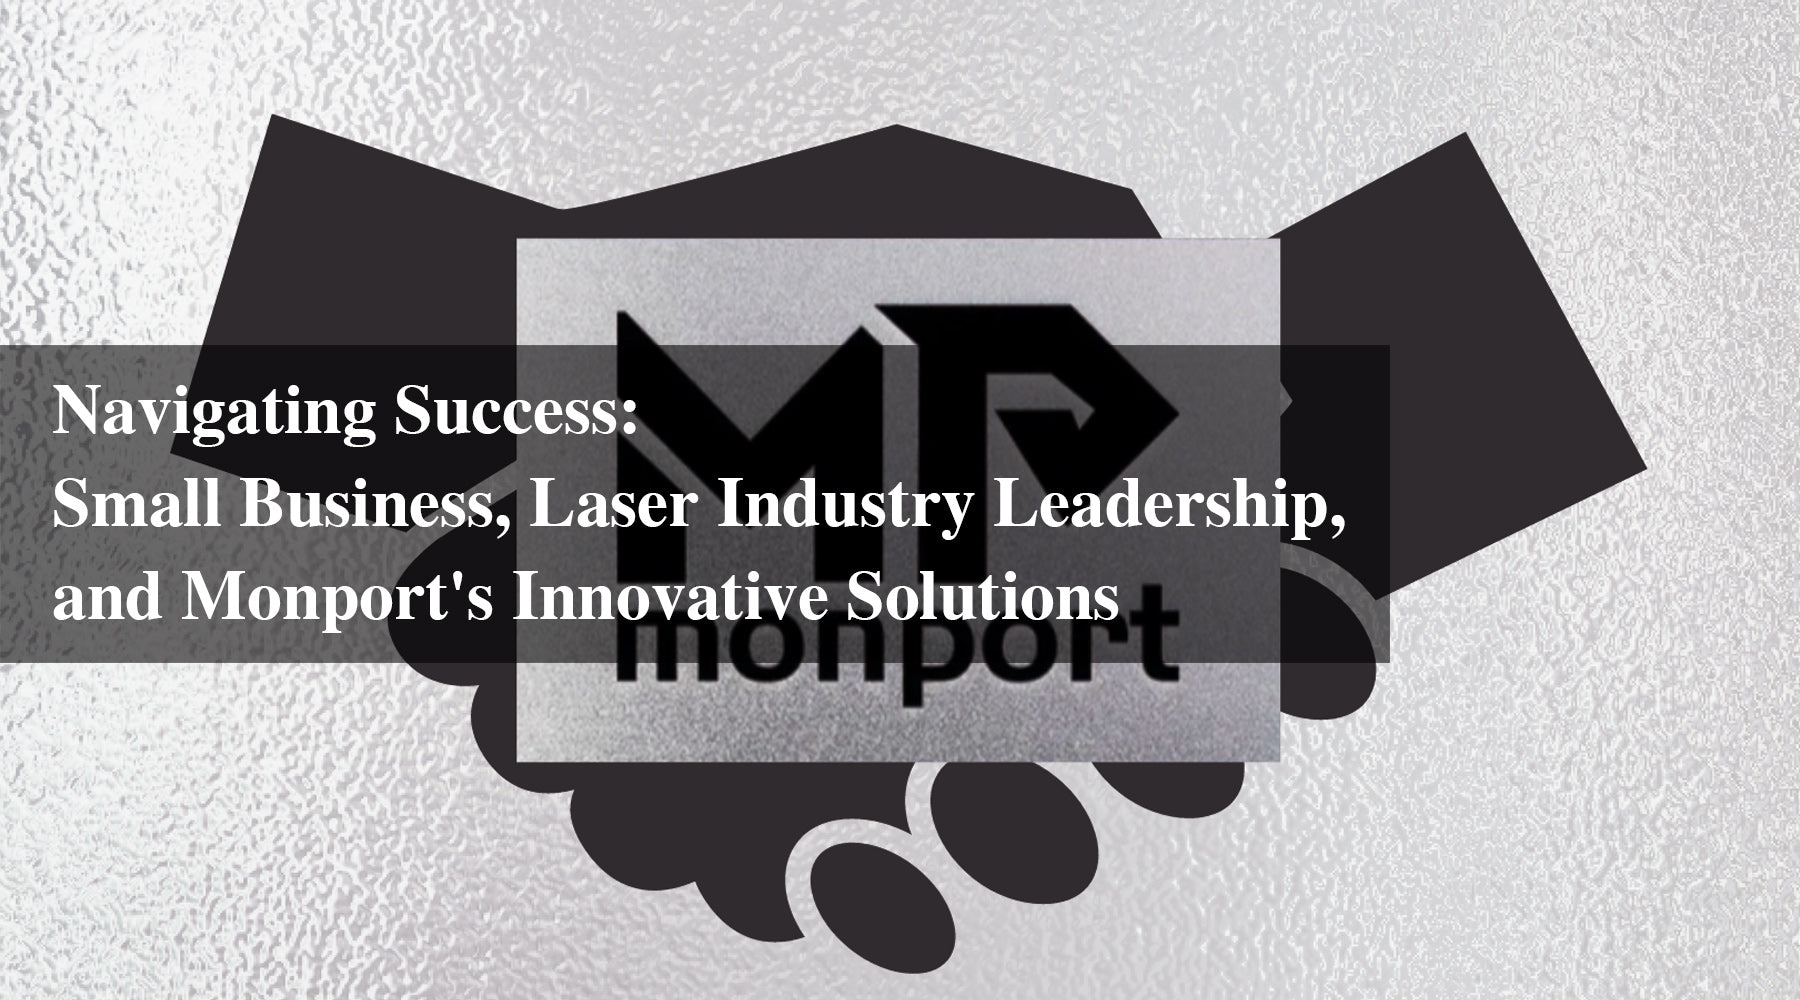 Navigating Success: Small Business, Laser Industry Leadership, and Monport's Innovative Solutions